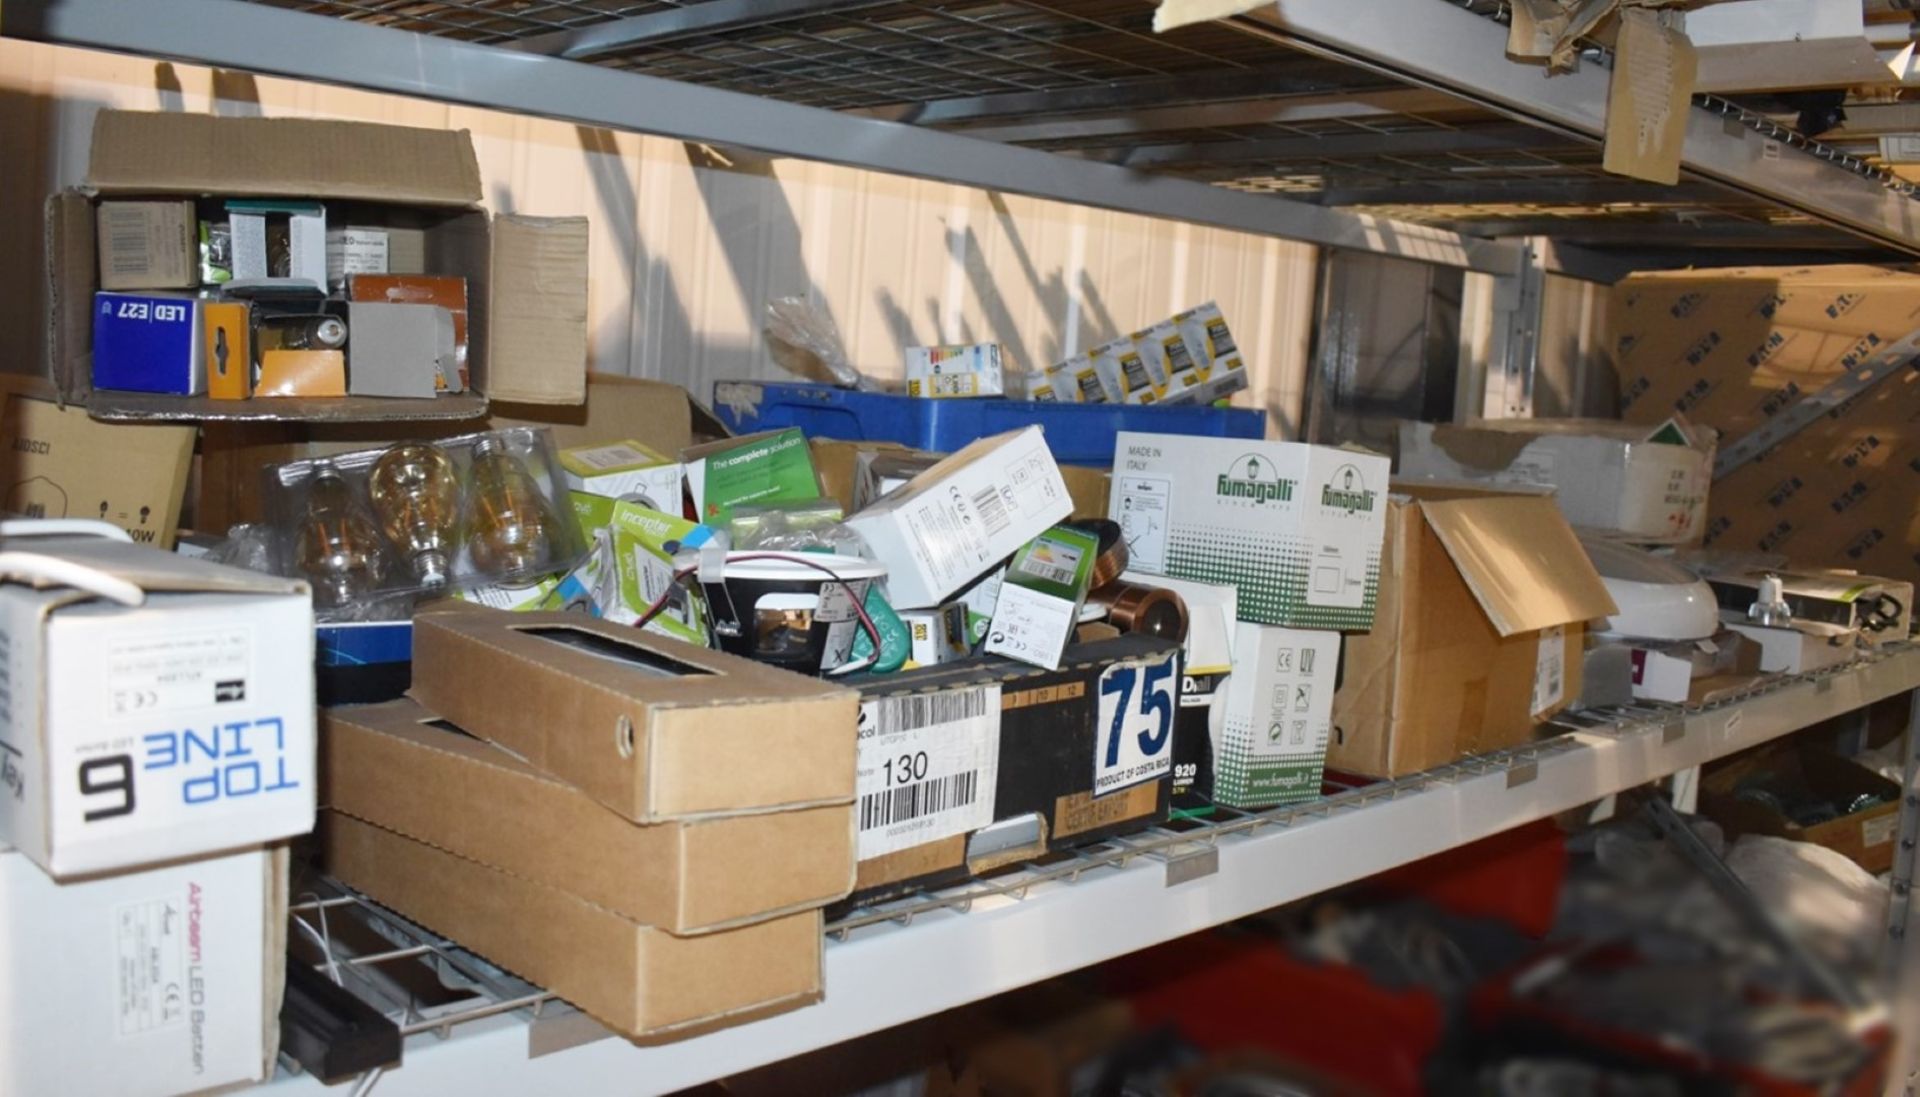 Large Assorted Job Lot - Many Various Items Included - Light Fittings, Bulbs, Emergency Exit Signs